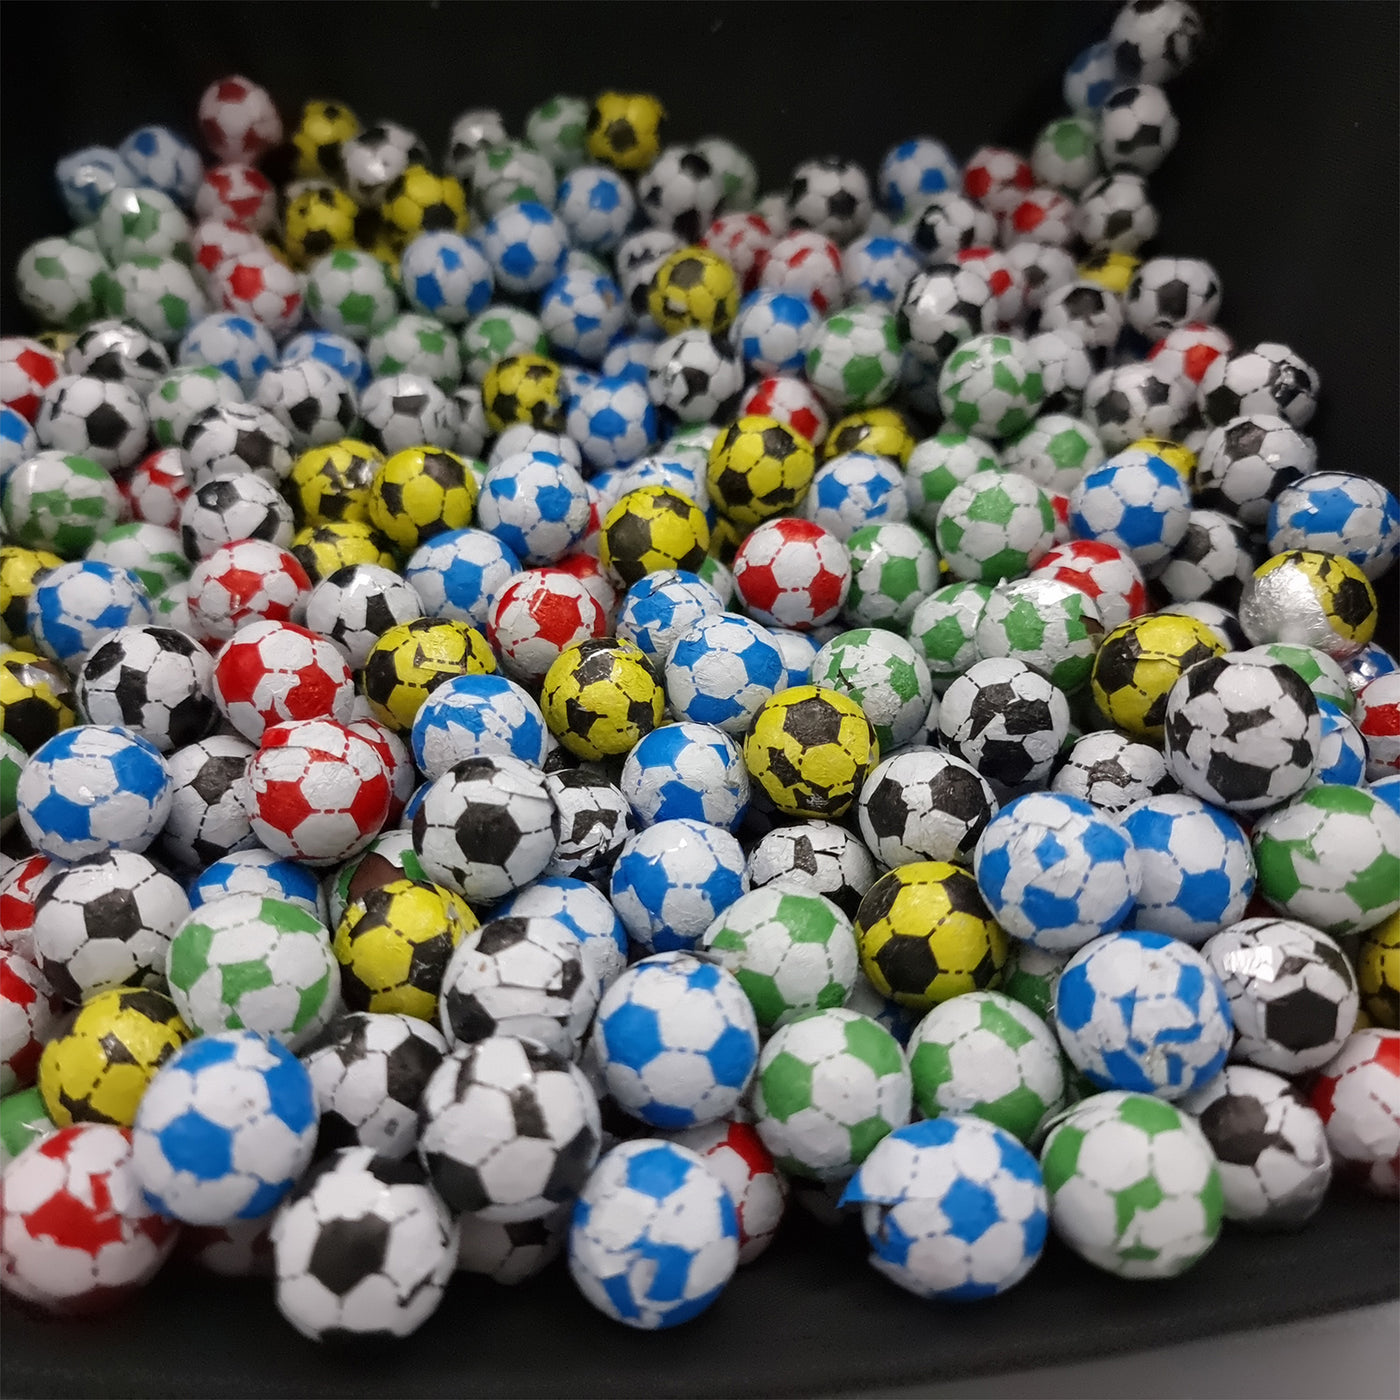 Pre-filled Blue Football Party Bags For Children. Party Favours With Sweets And Toys.